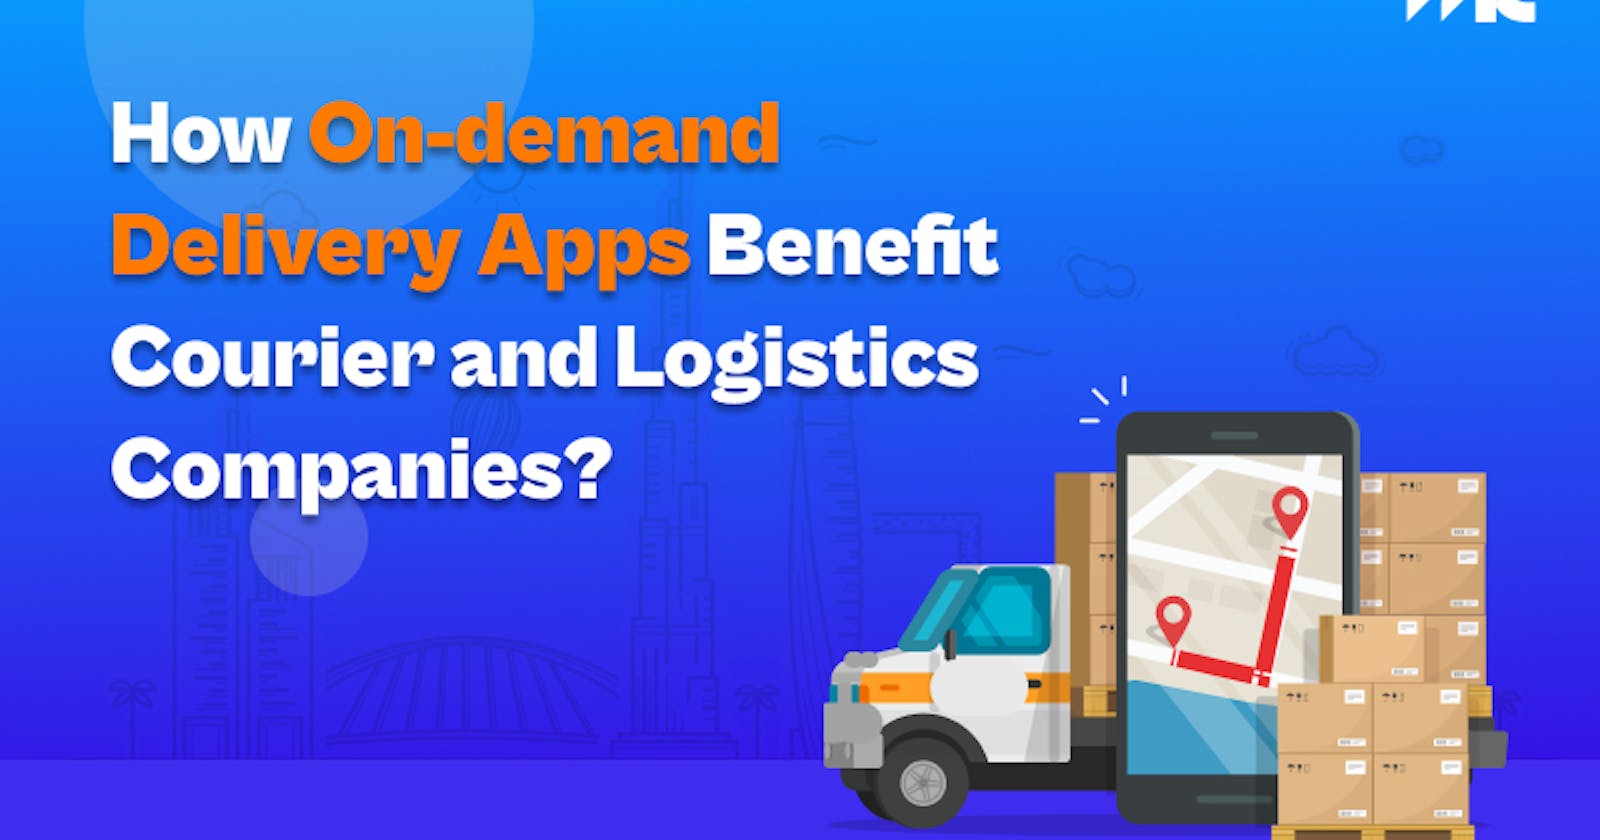 How On-demand Delivery Apps Benefit Courier and Logistics Companies?